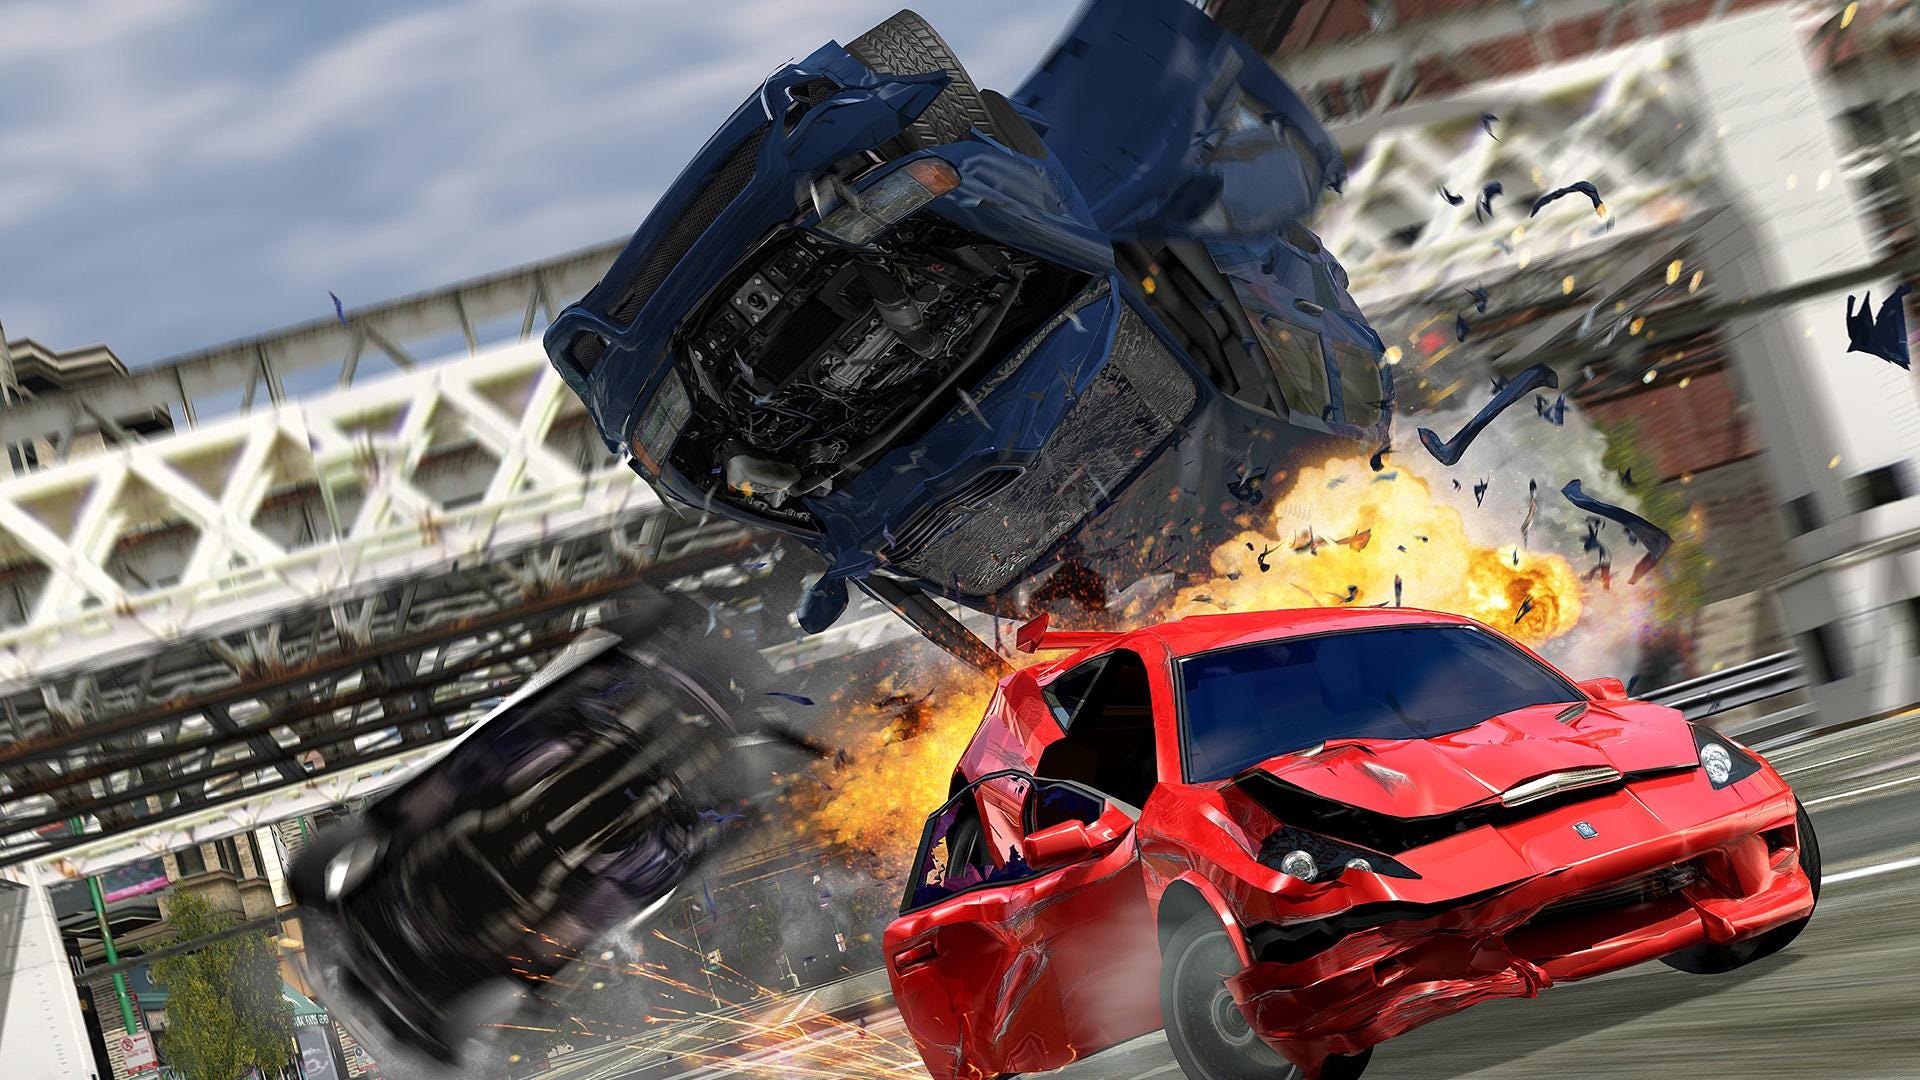 $5 Burnout and Need for Speed Games in Xbox One/360 Weekly Deals